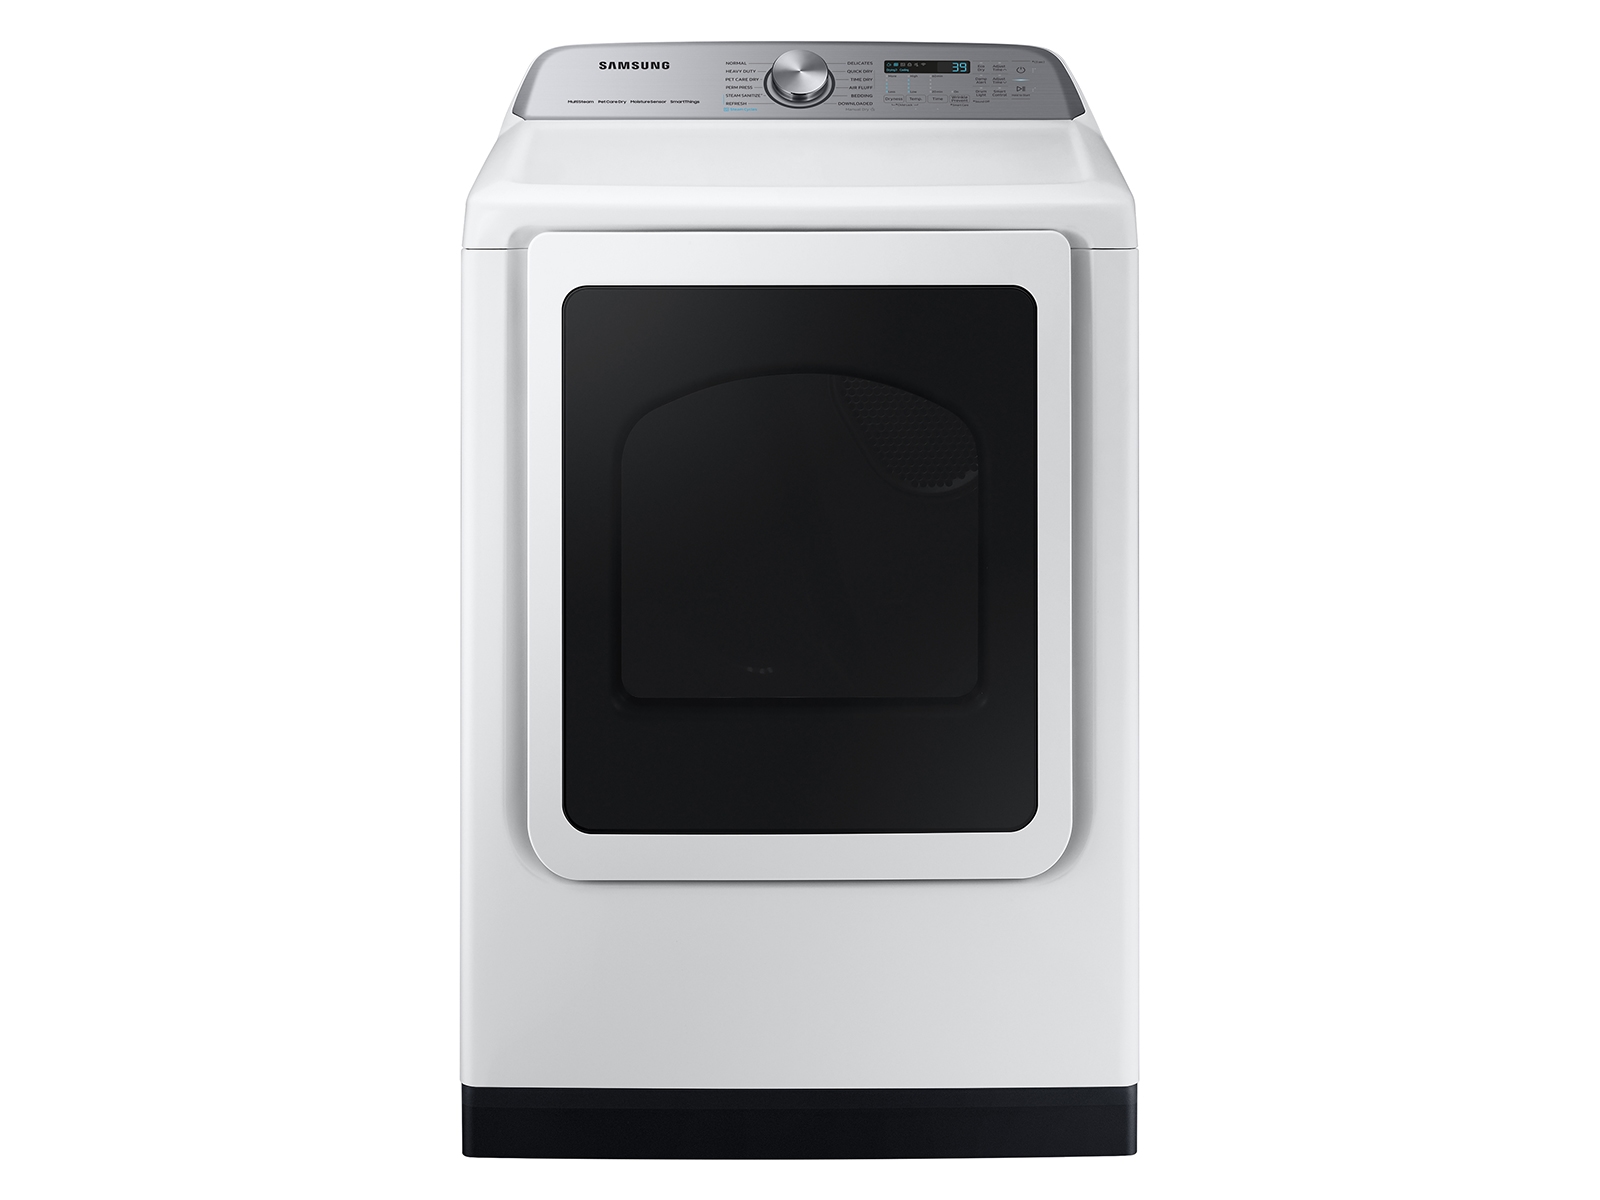 Photos - Tumble Dryer Samsung 7.4 cu. ft. Smart Gas Dryer with Steam Sanitize+ in White(DVG55CG7 